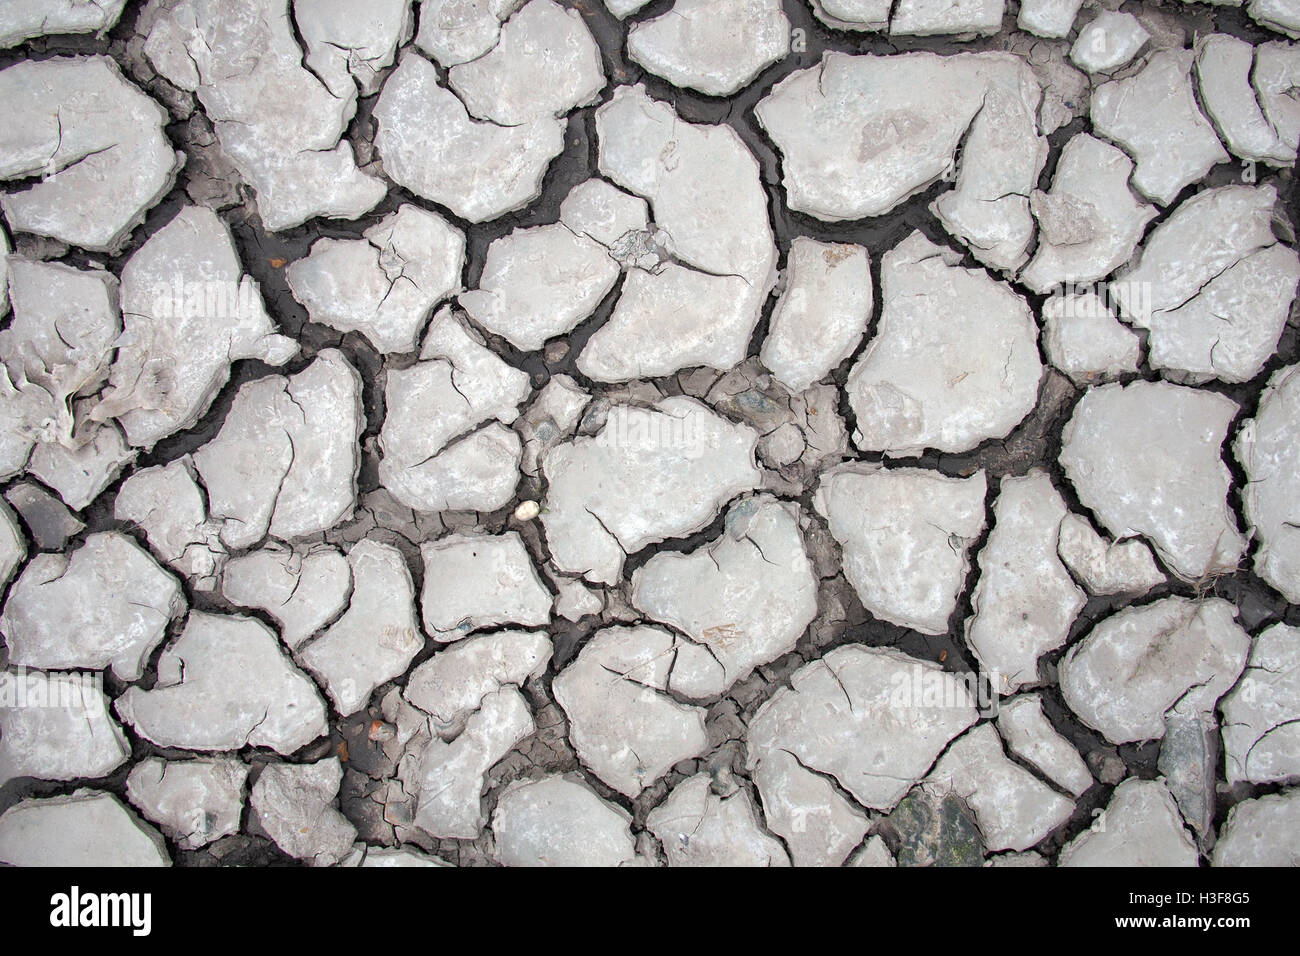 Dry cracked soil earth drought climate change global warming Stock Photo